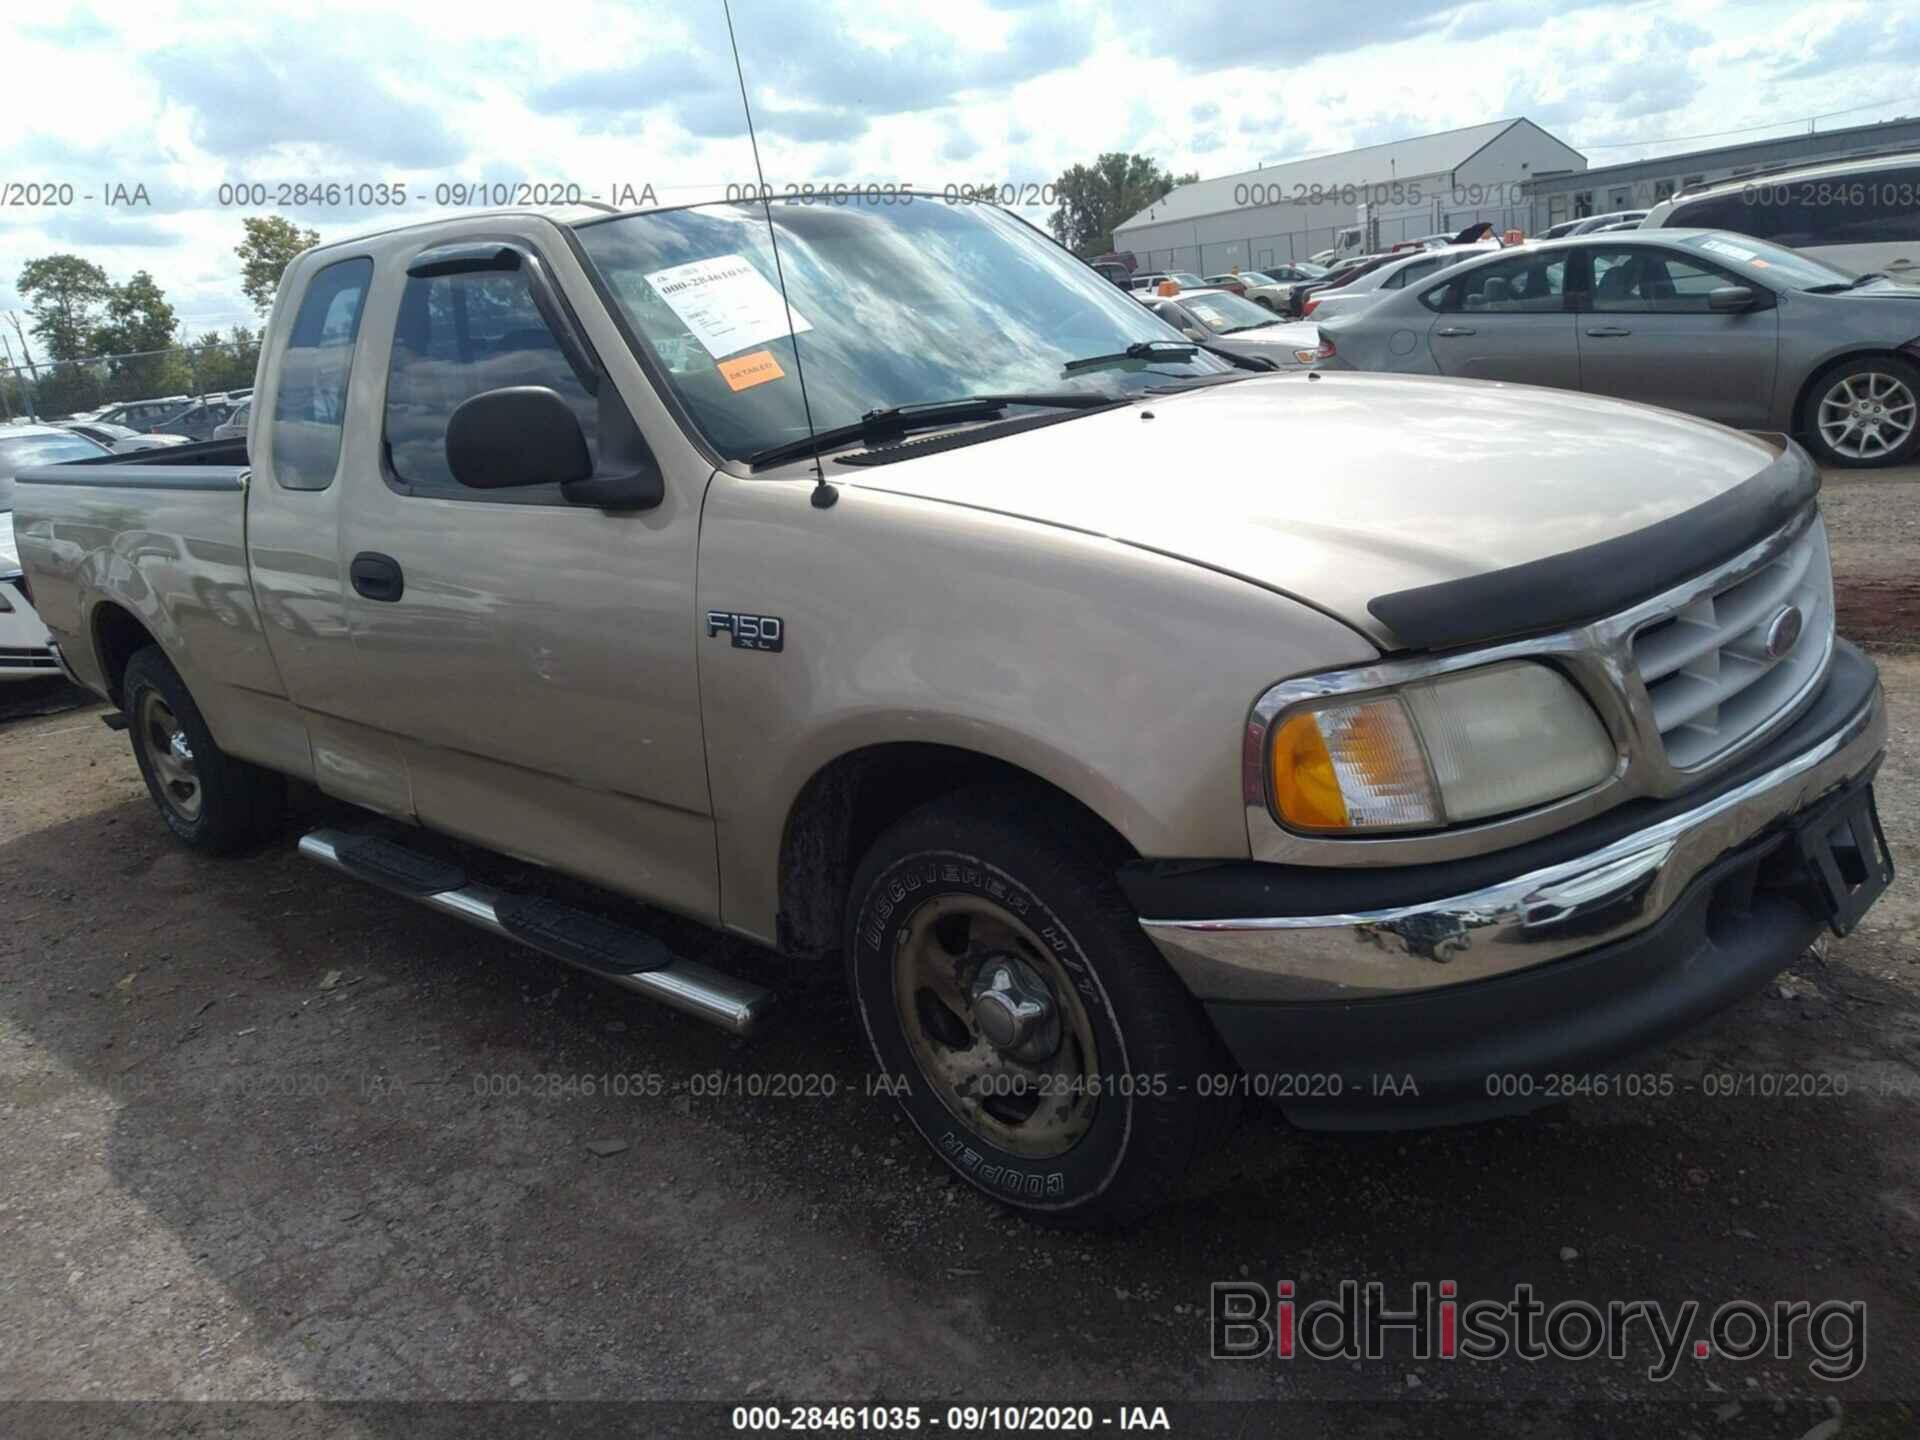 Photo 1FTZX1729XNB16407 - FORD F-150 1999